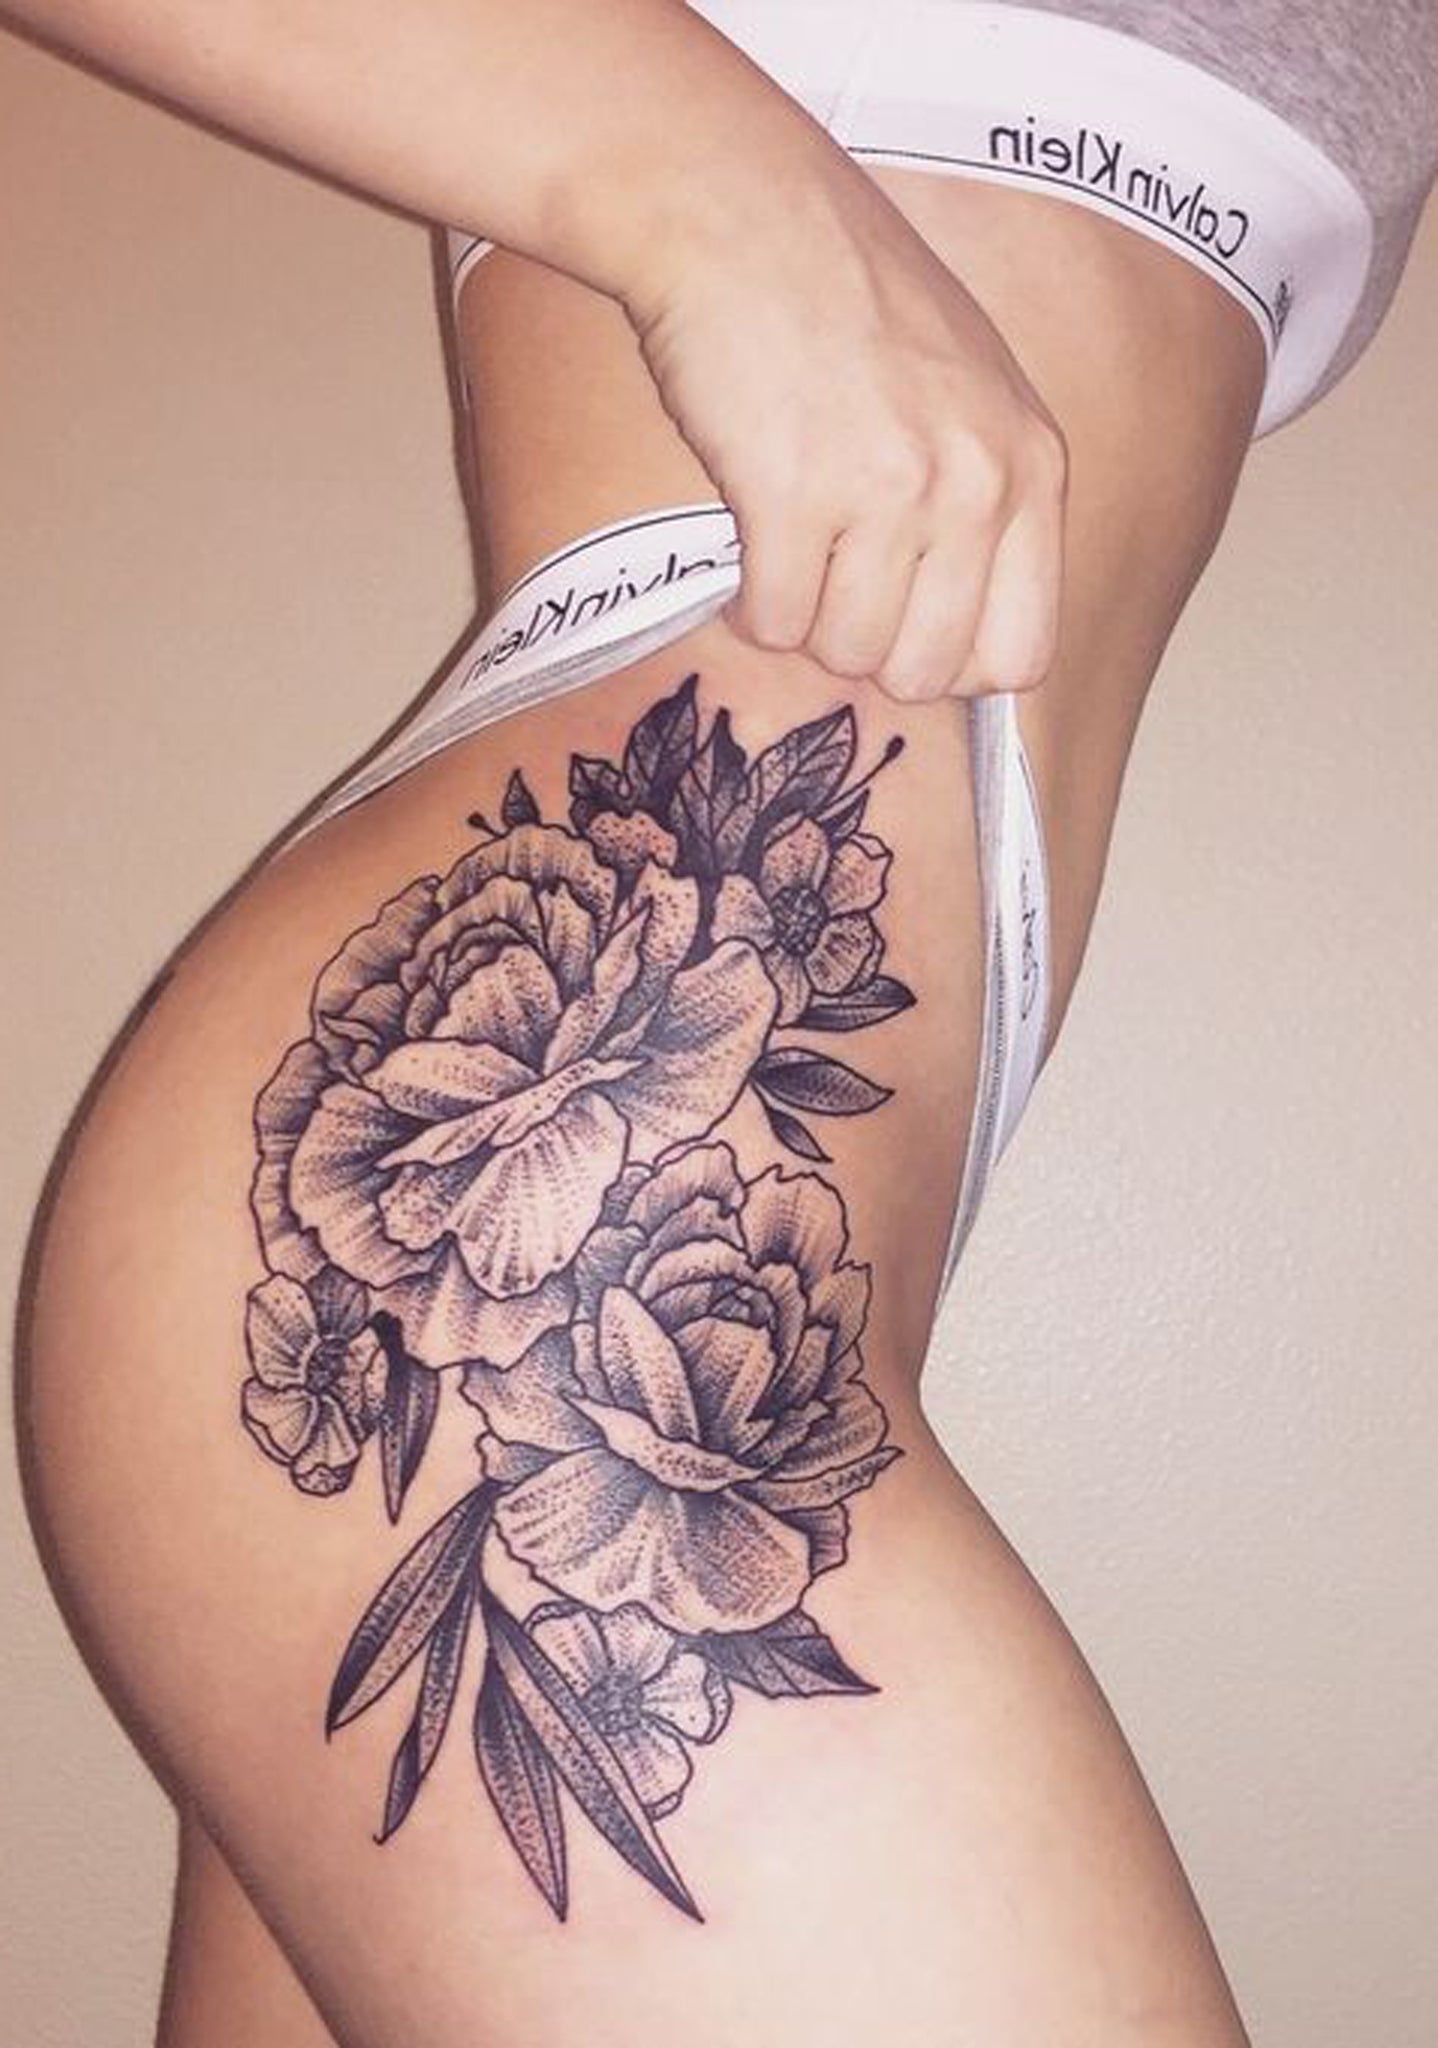 Black and White Flower Hip Tattoo Ideas for Women - Delicate Realistic Wild Rose Thigh Tat - www.MyBodiArt.com